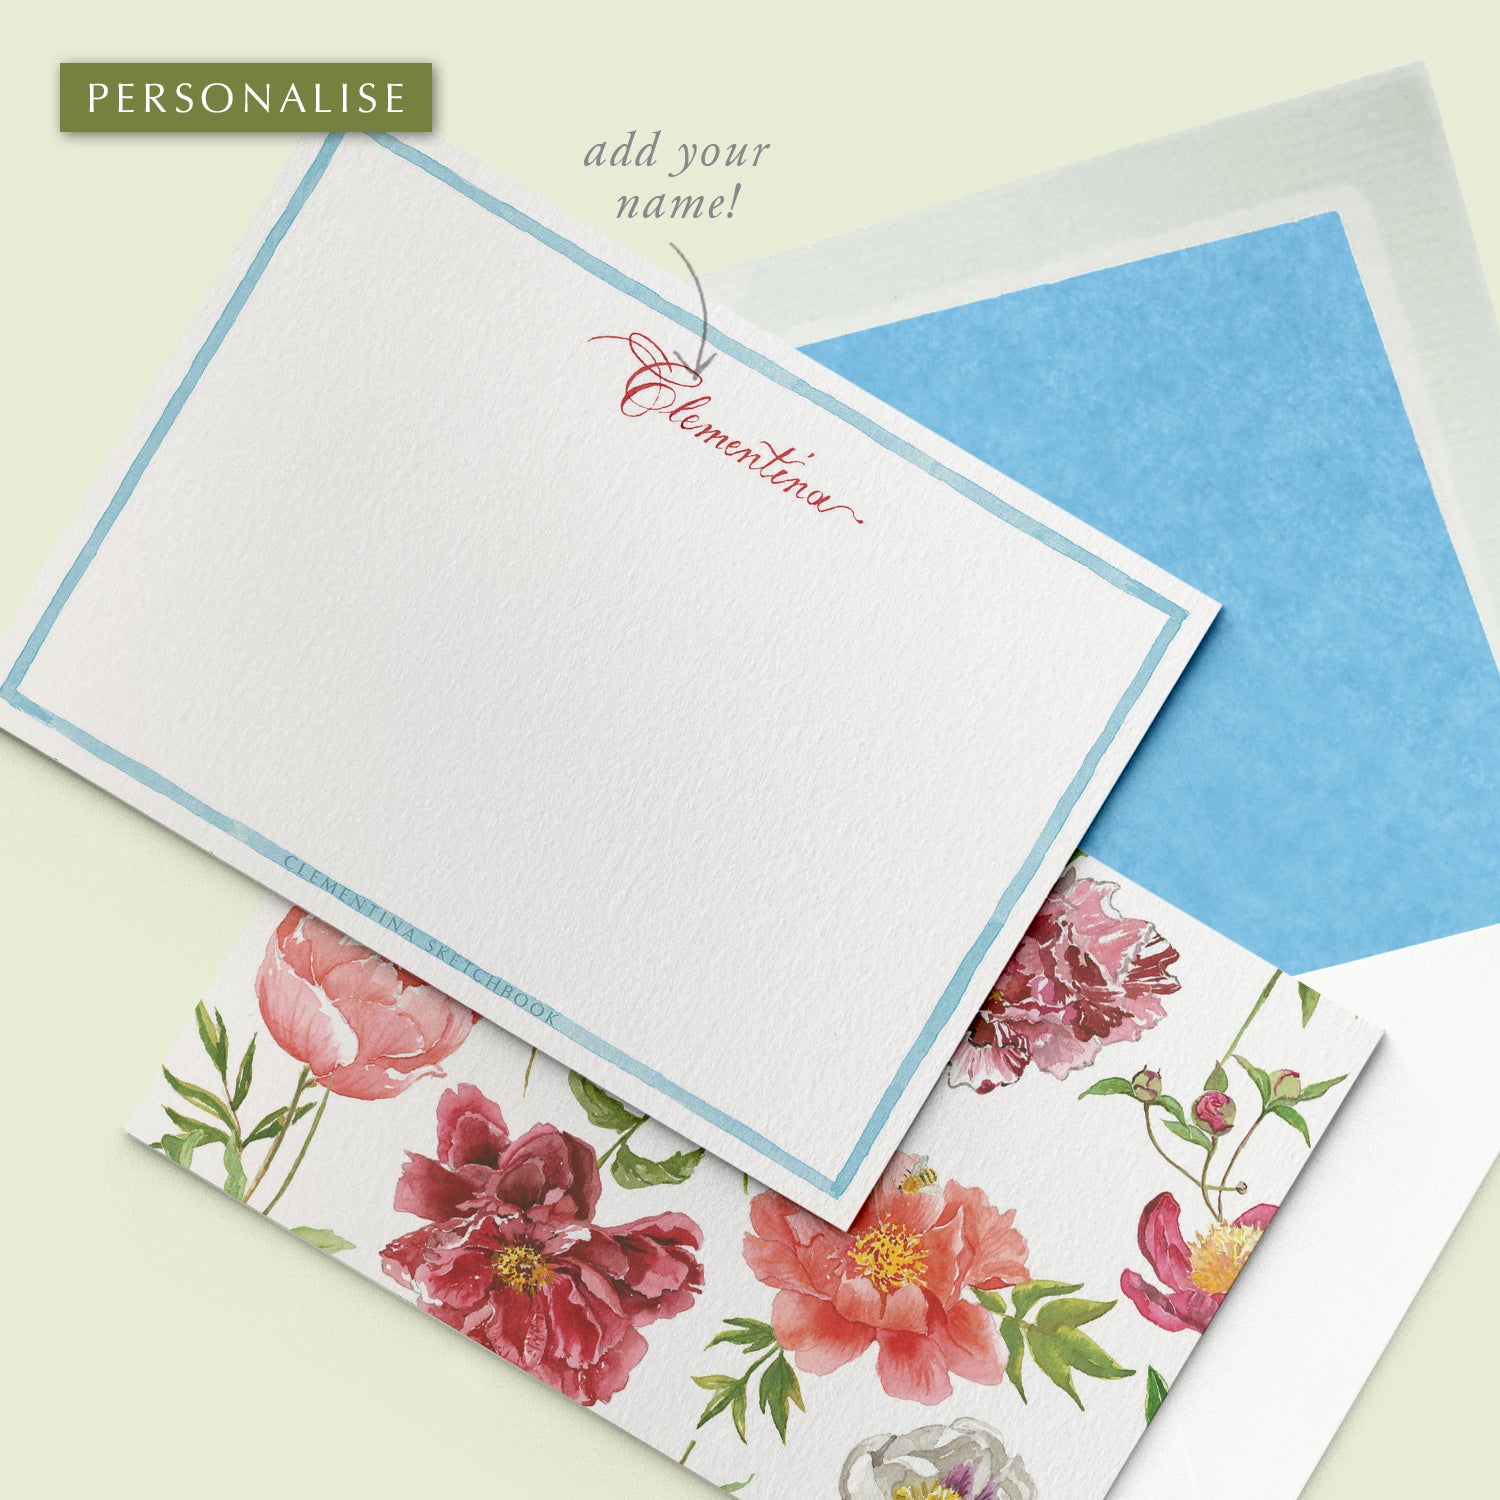 Peonies stationery cards - 05